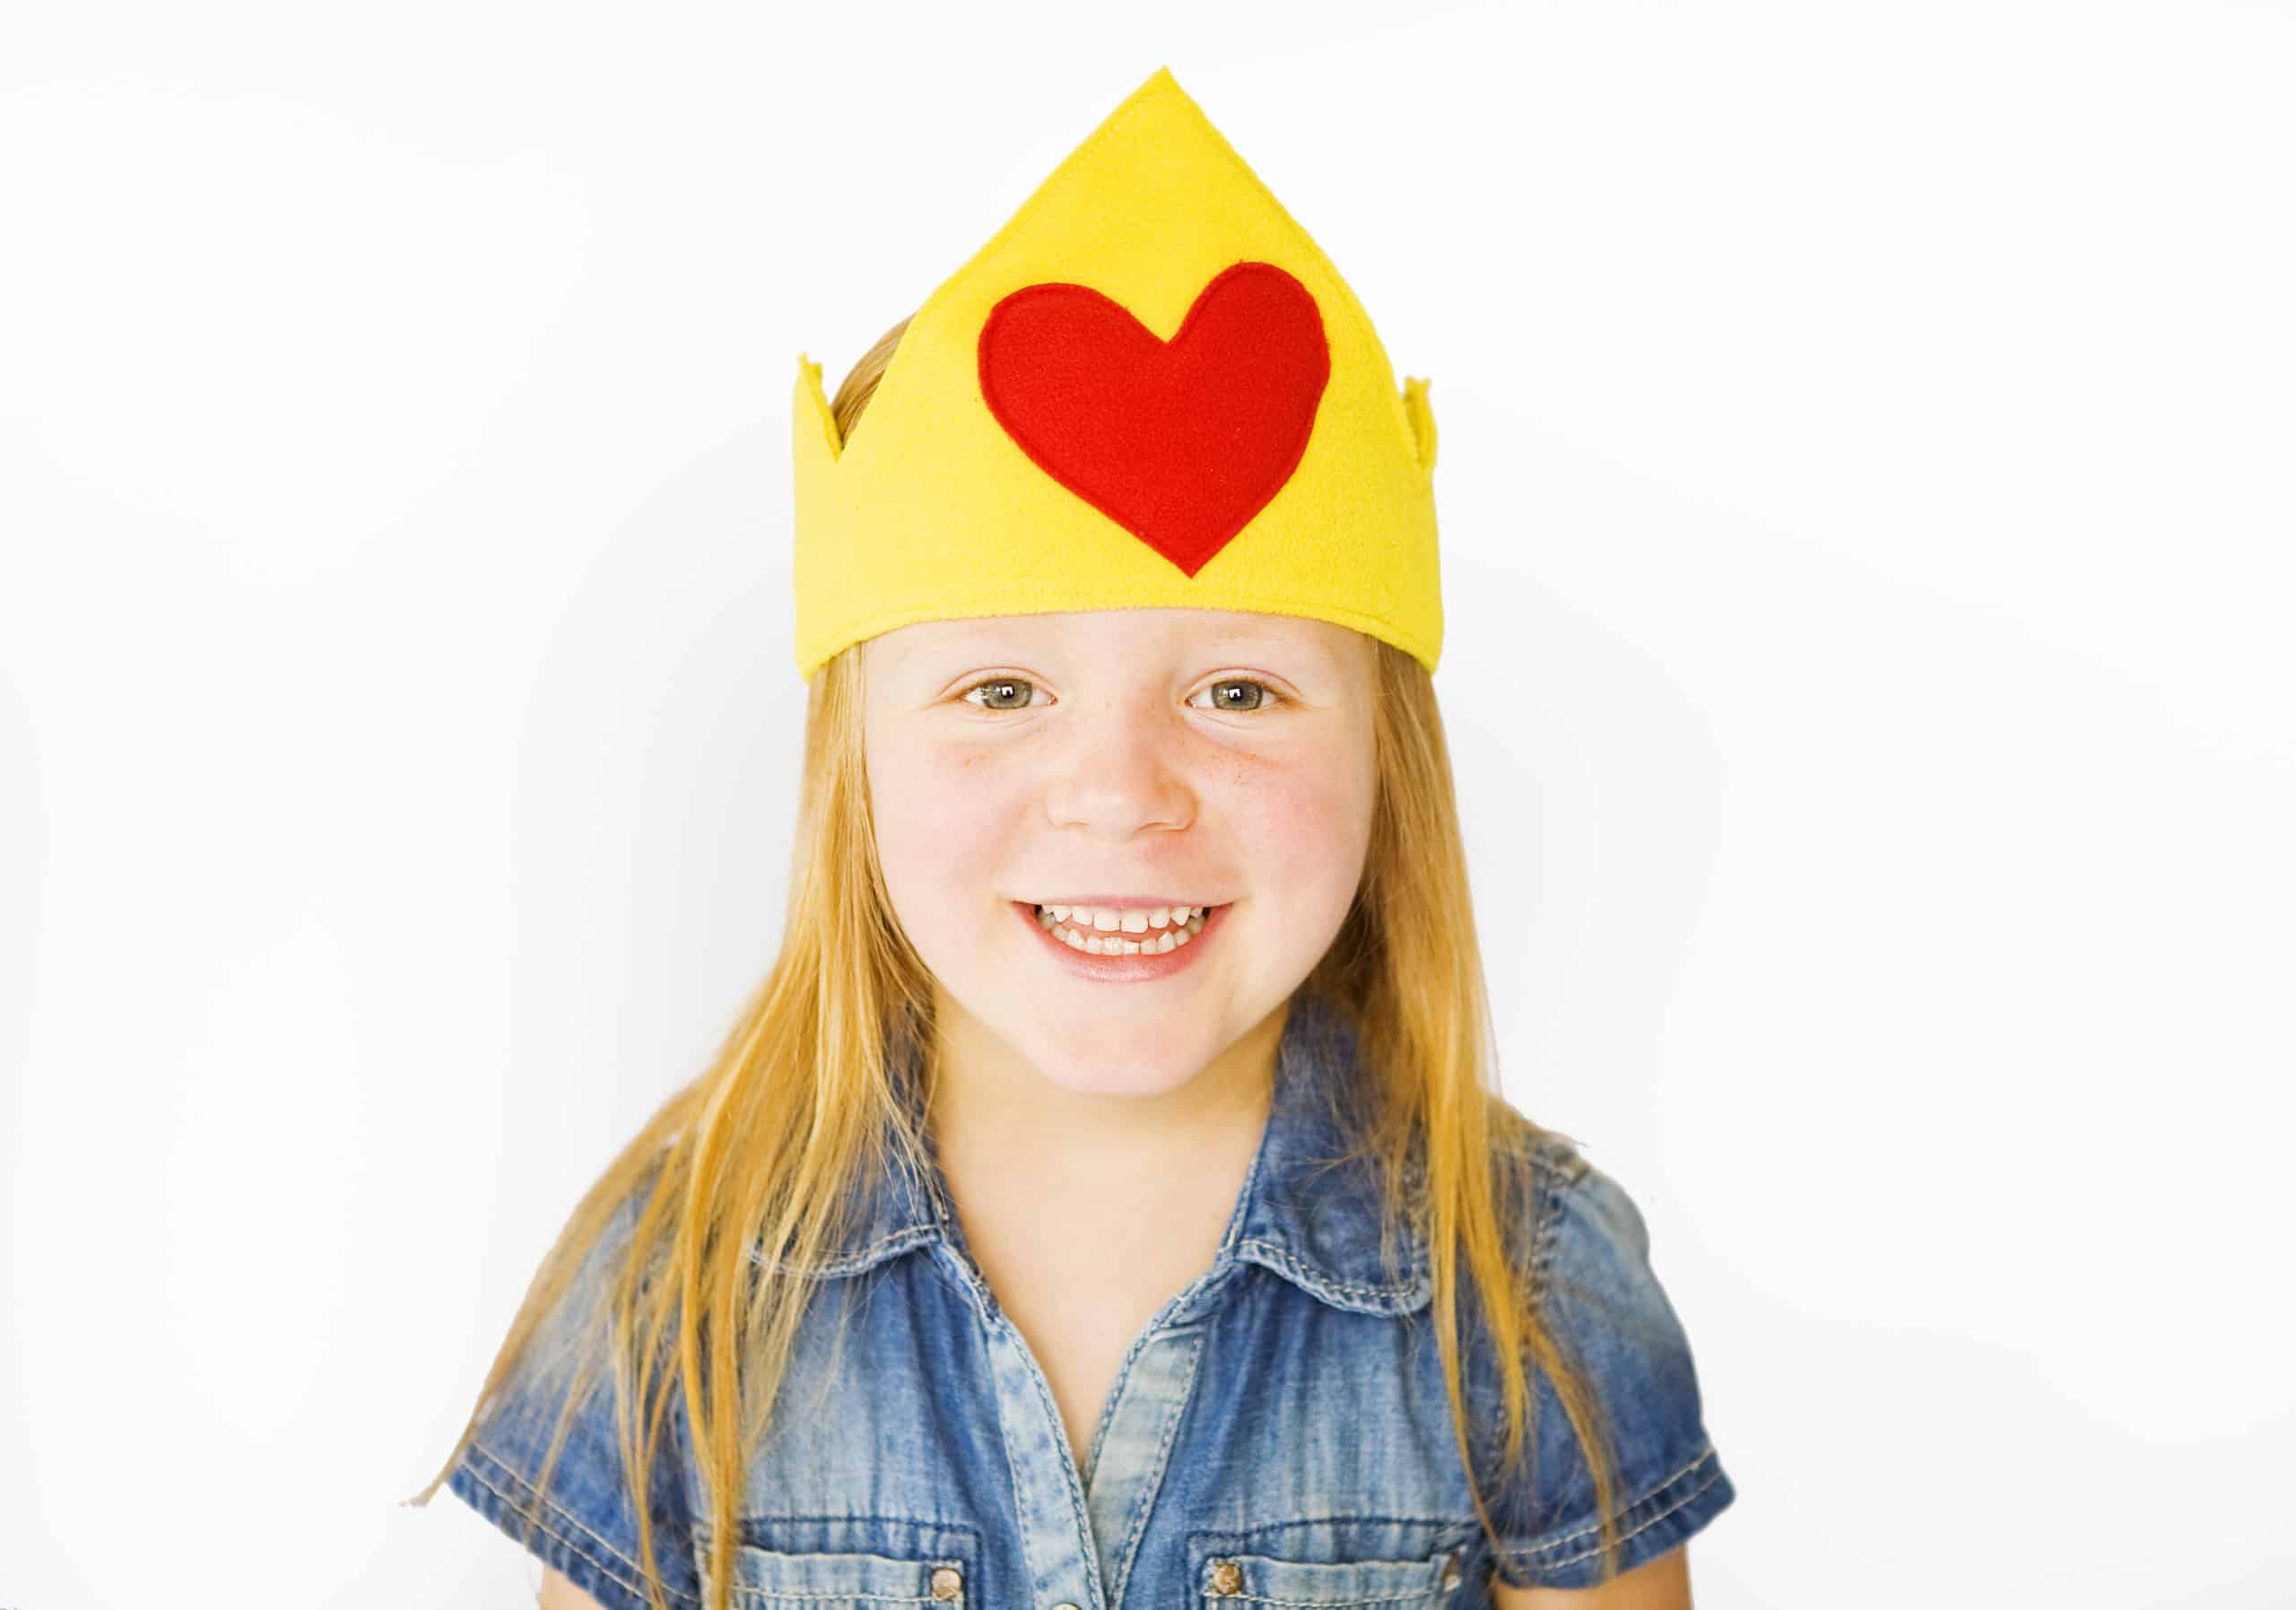 Gold with red heart adjustable fleece crown